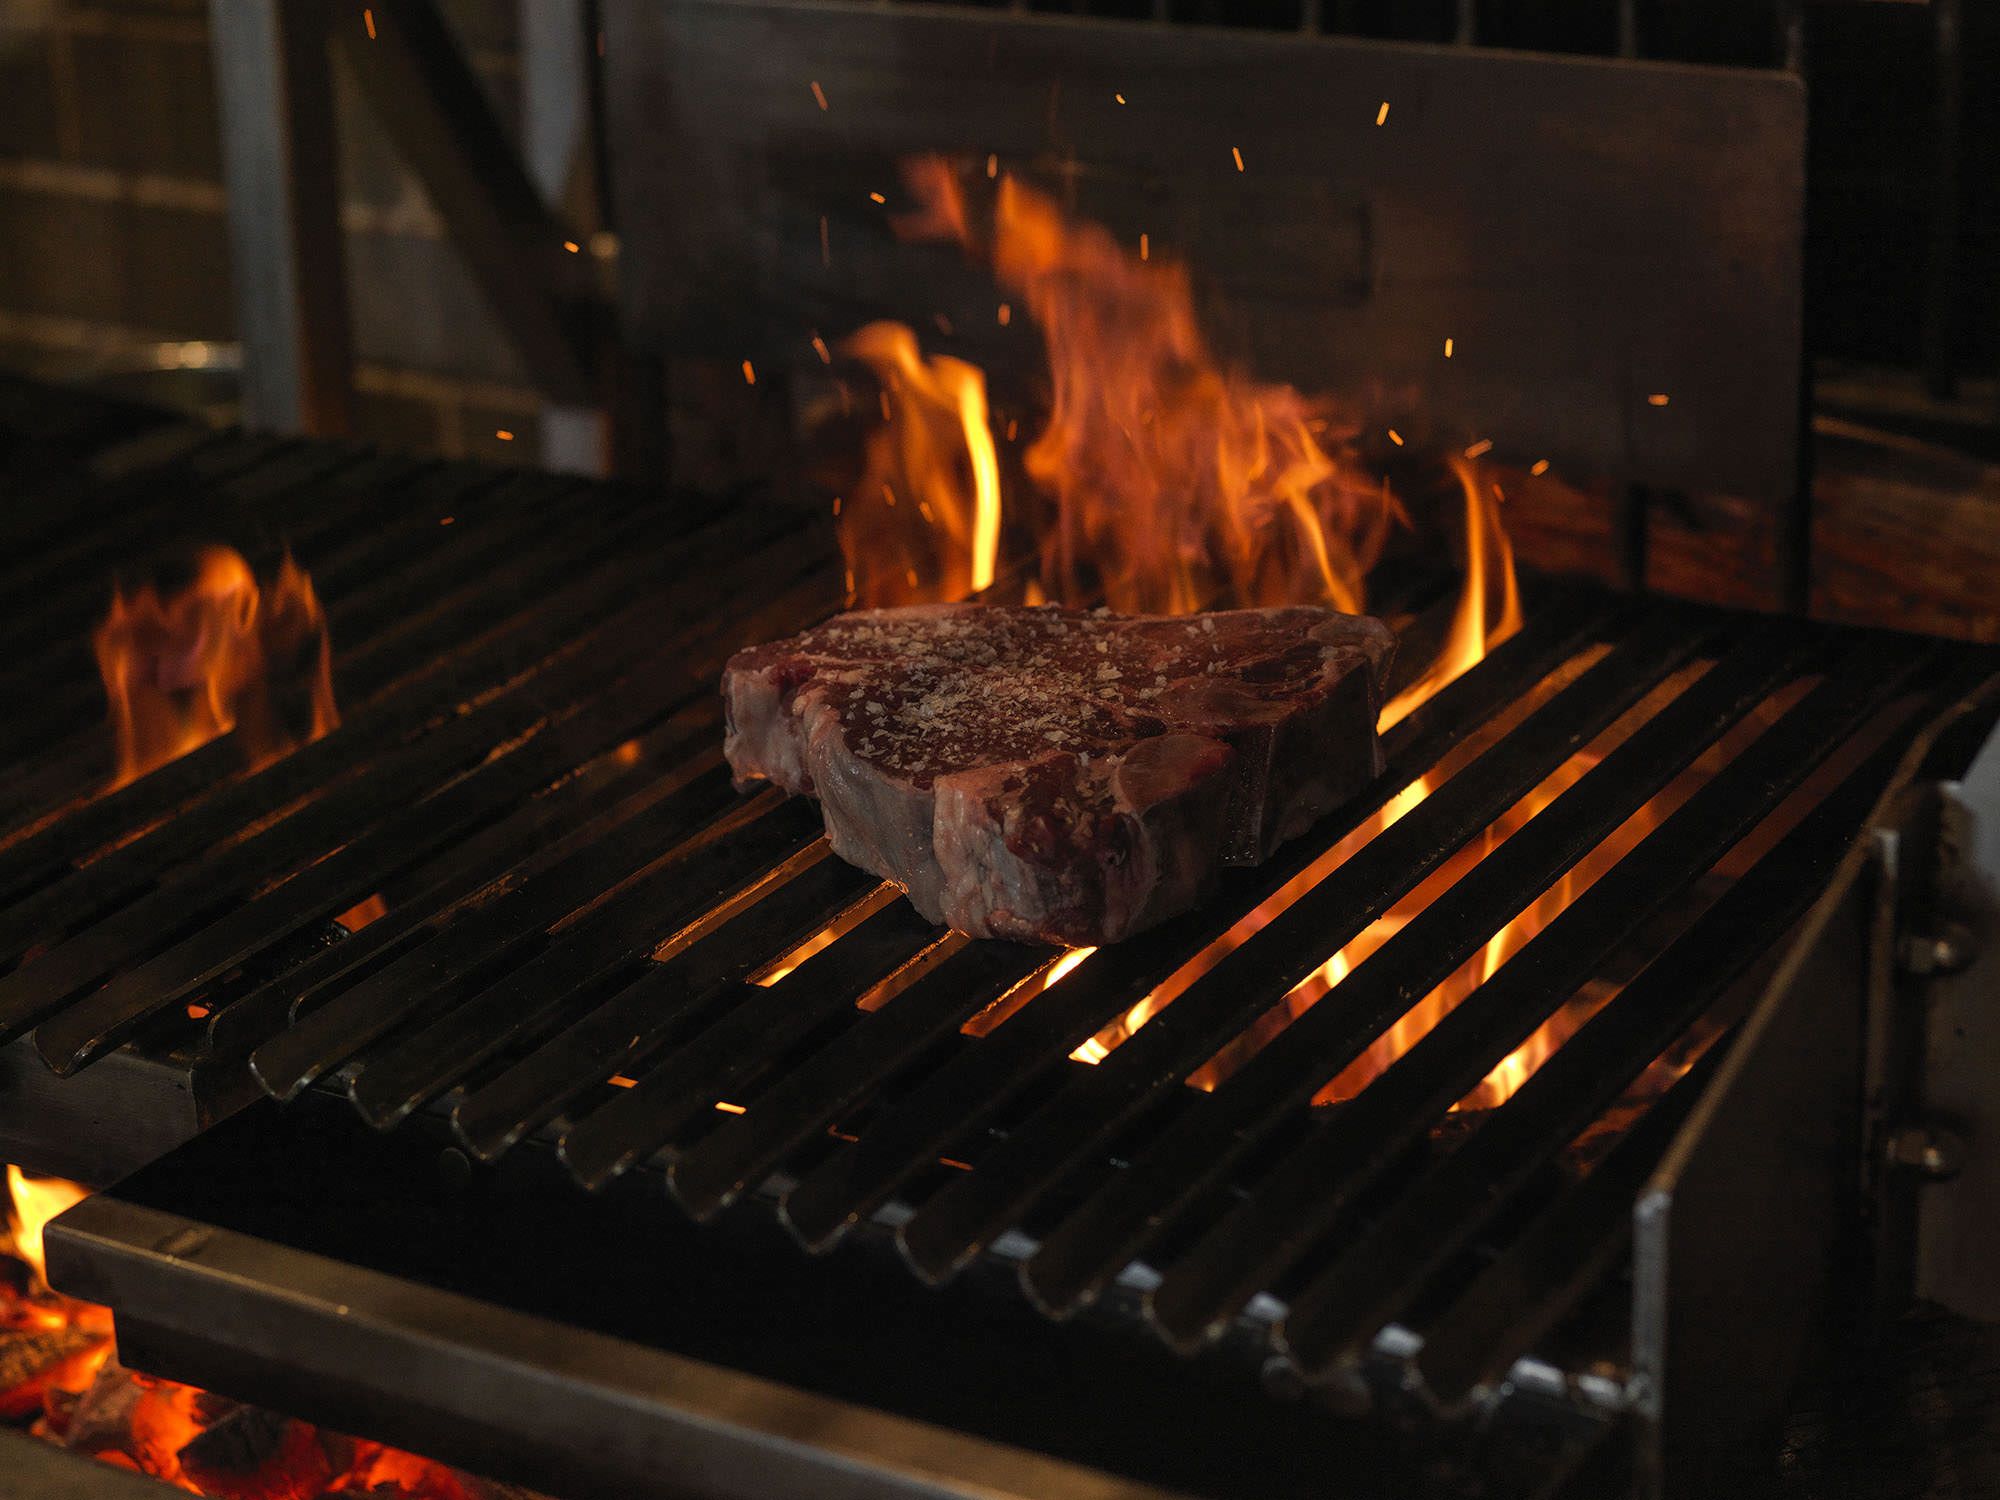 Beef, salt and fire: the making of a modern masterpiece at Woodcut.